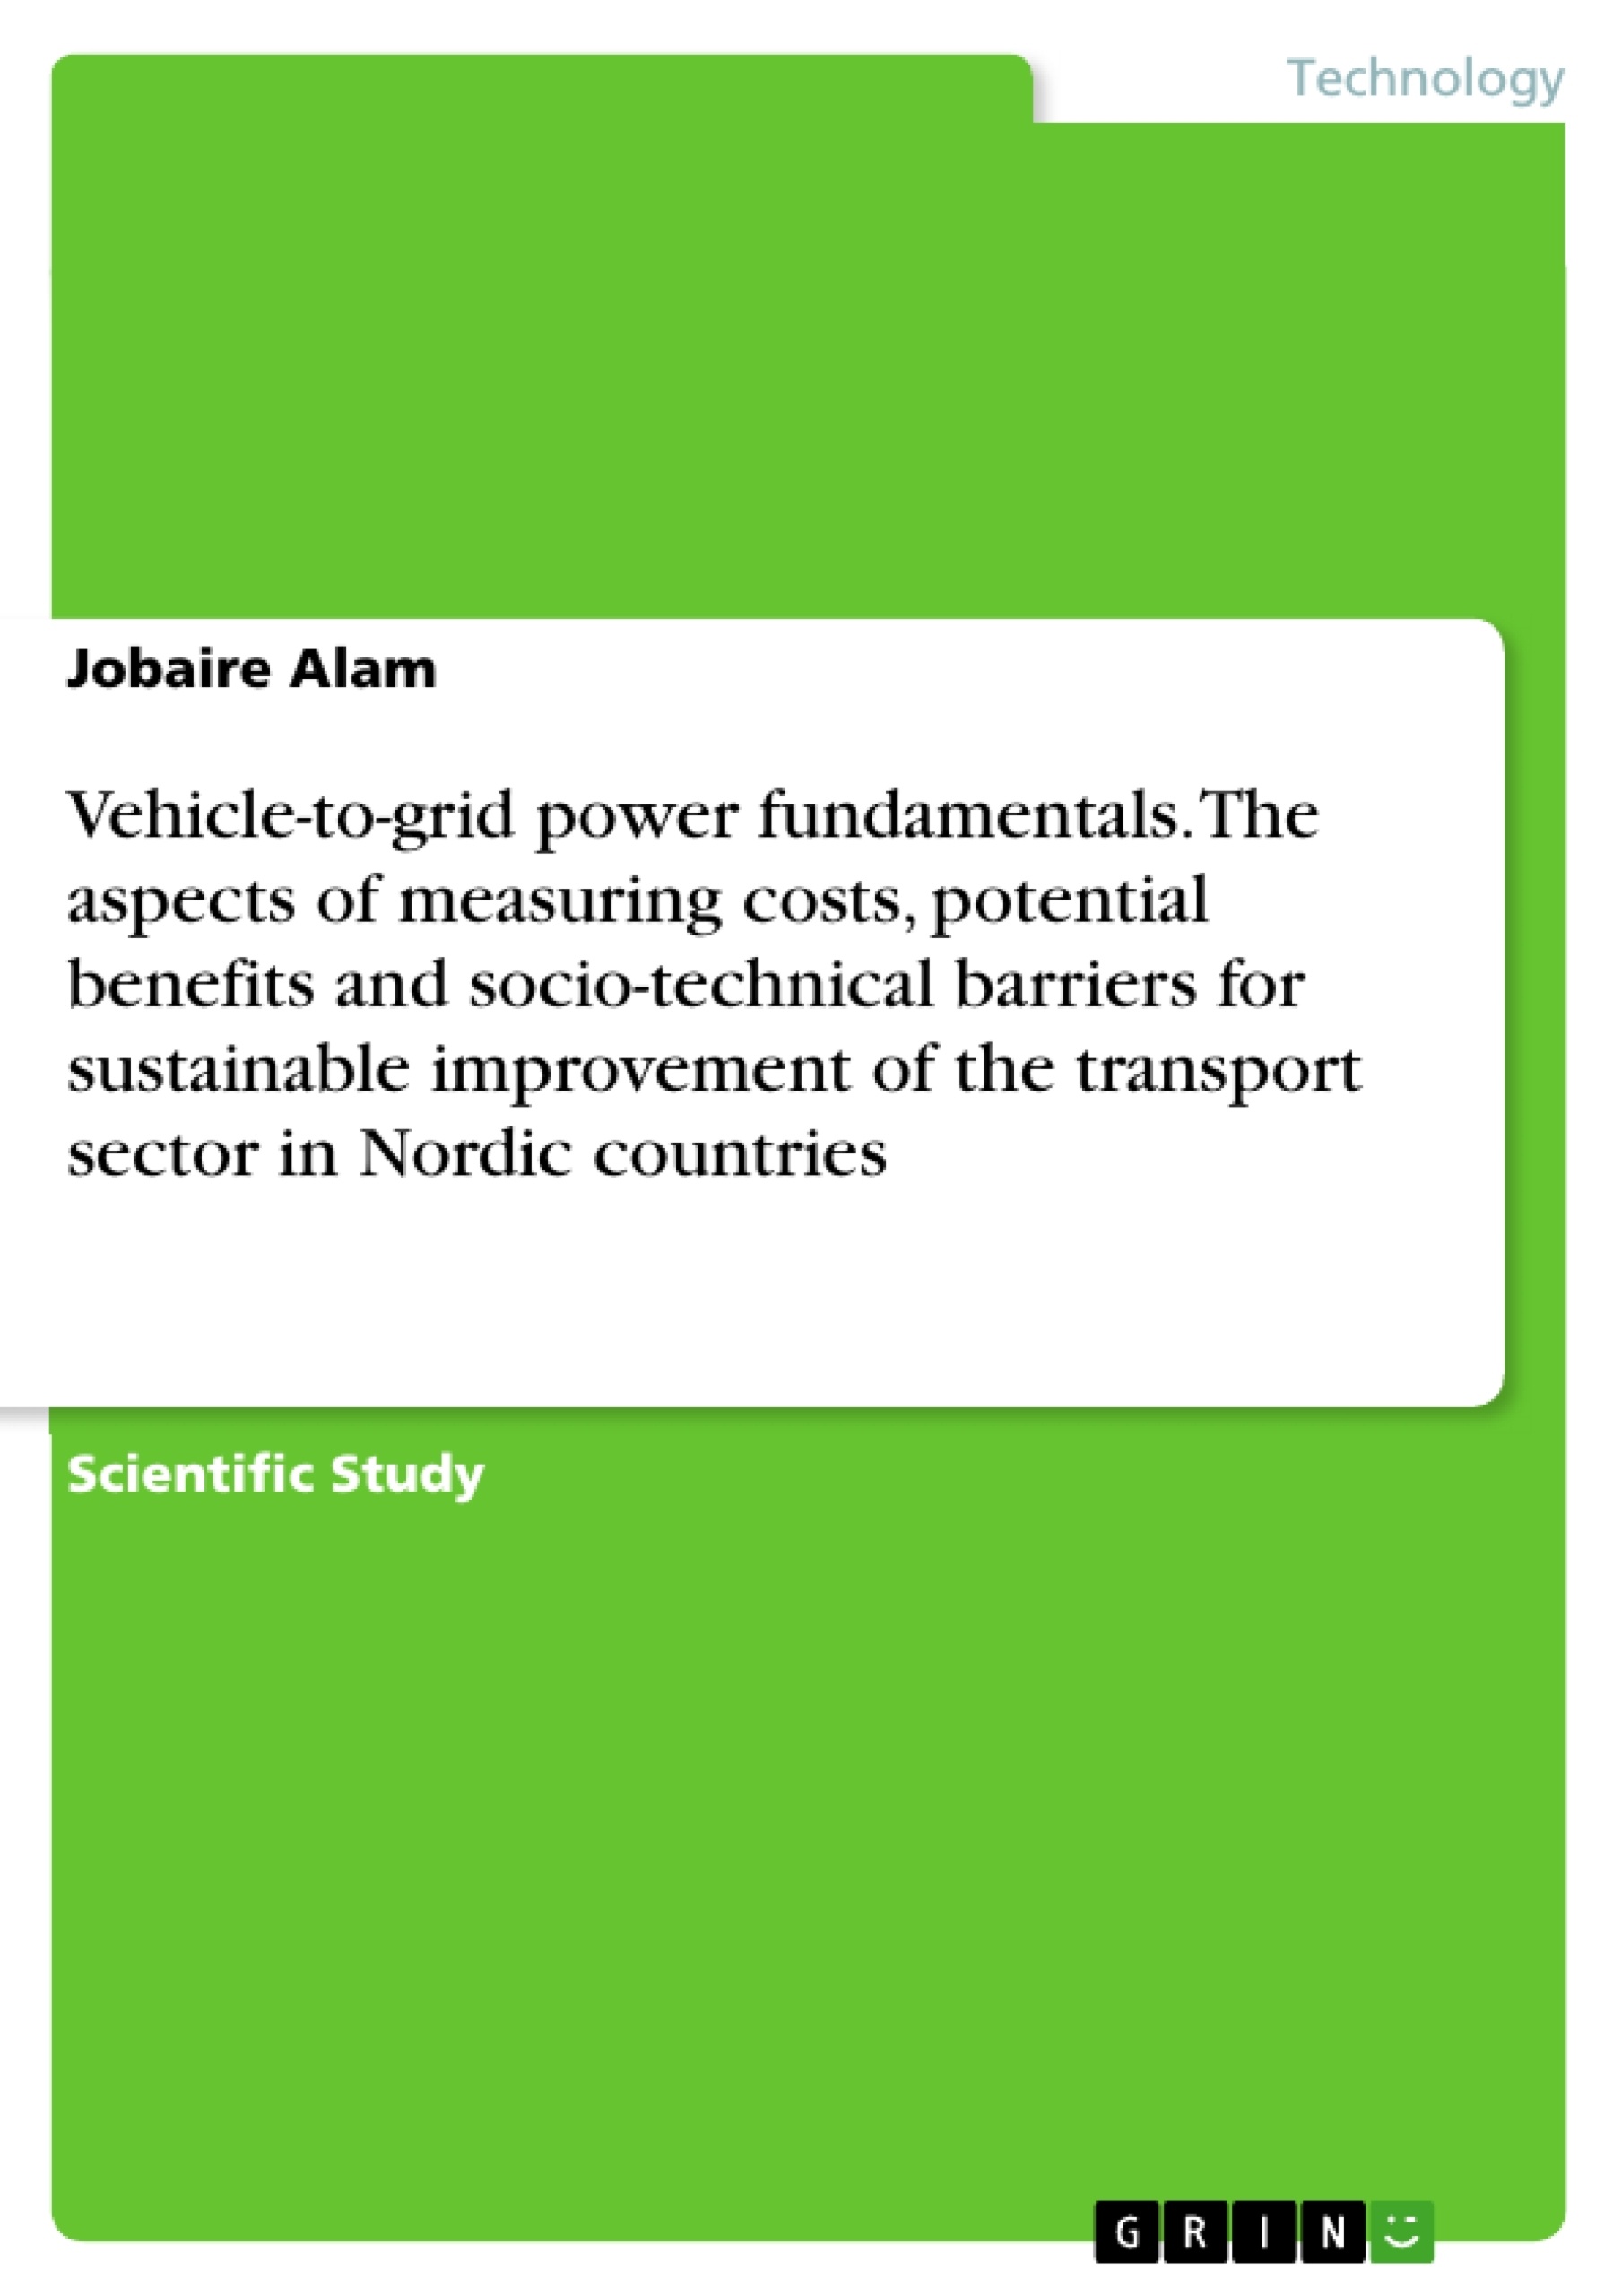 Titre: Vehicle-to-grid power fundamentals. The aspects of measuring costs, potential benefits and socio-technical barriers for sustainable improvement of the transport sector in Nordic countries